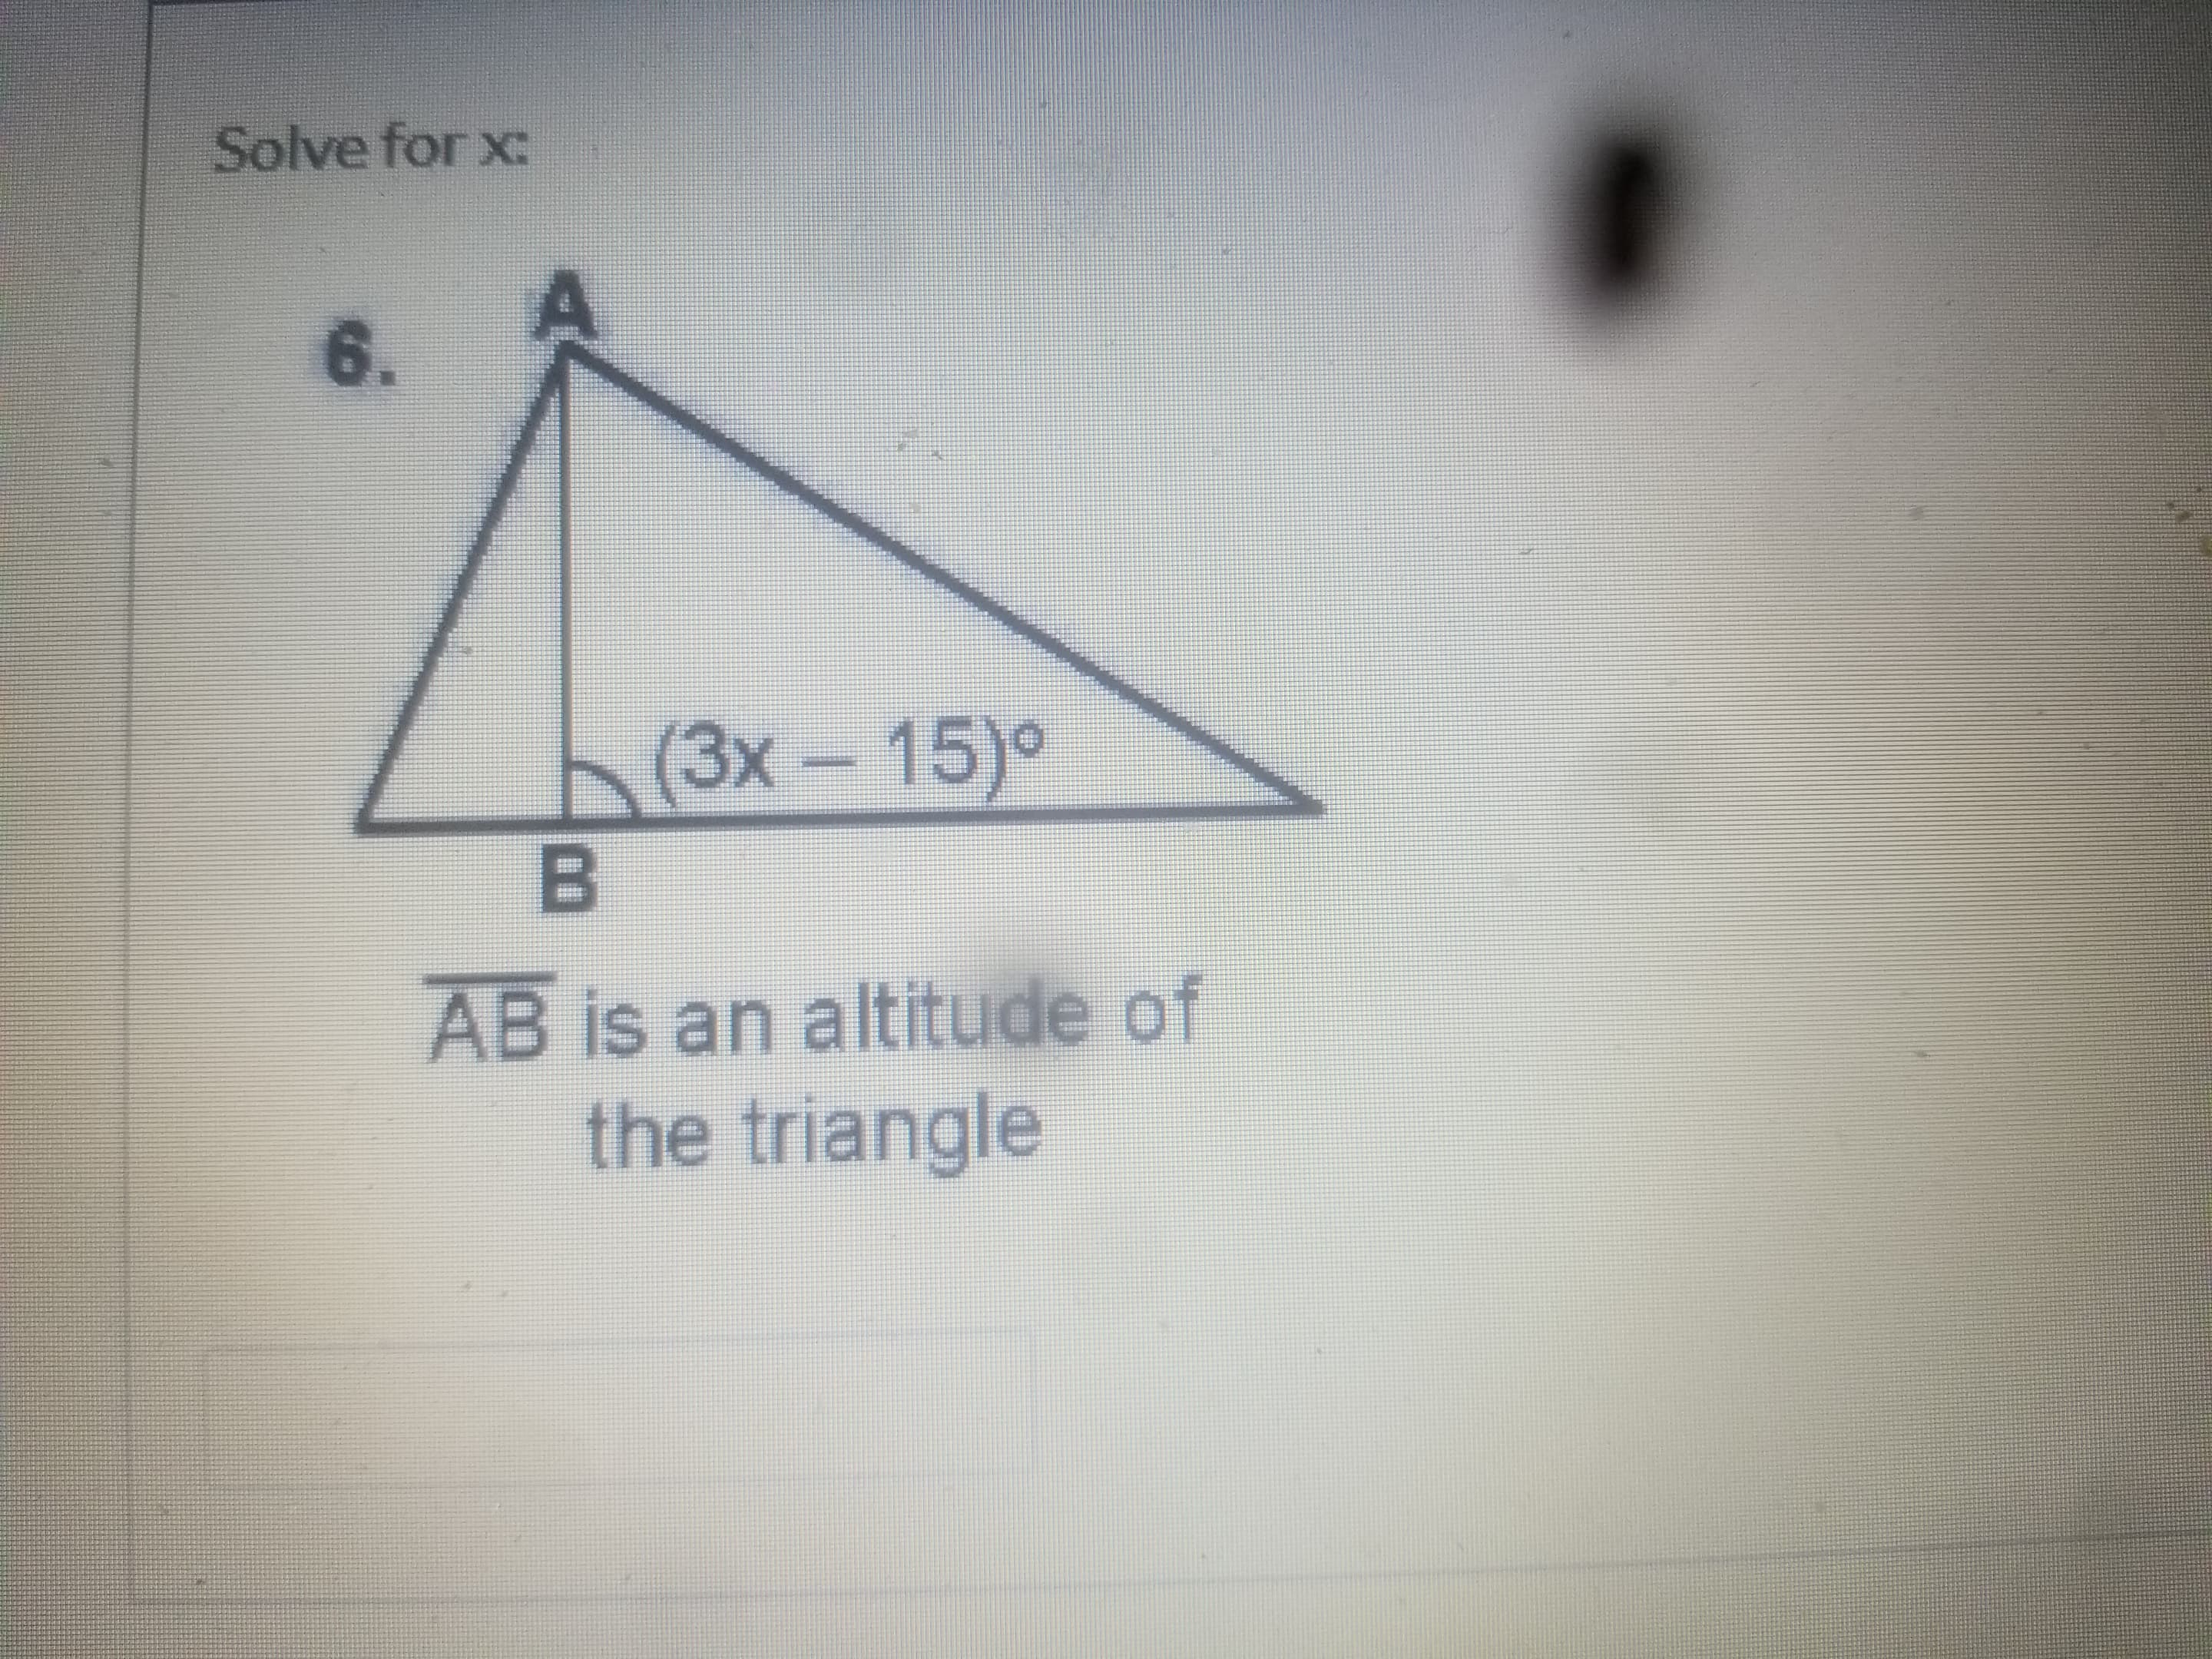 AB is an altitude of
the triangle
